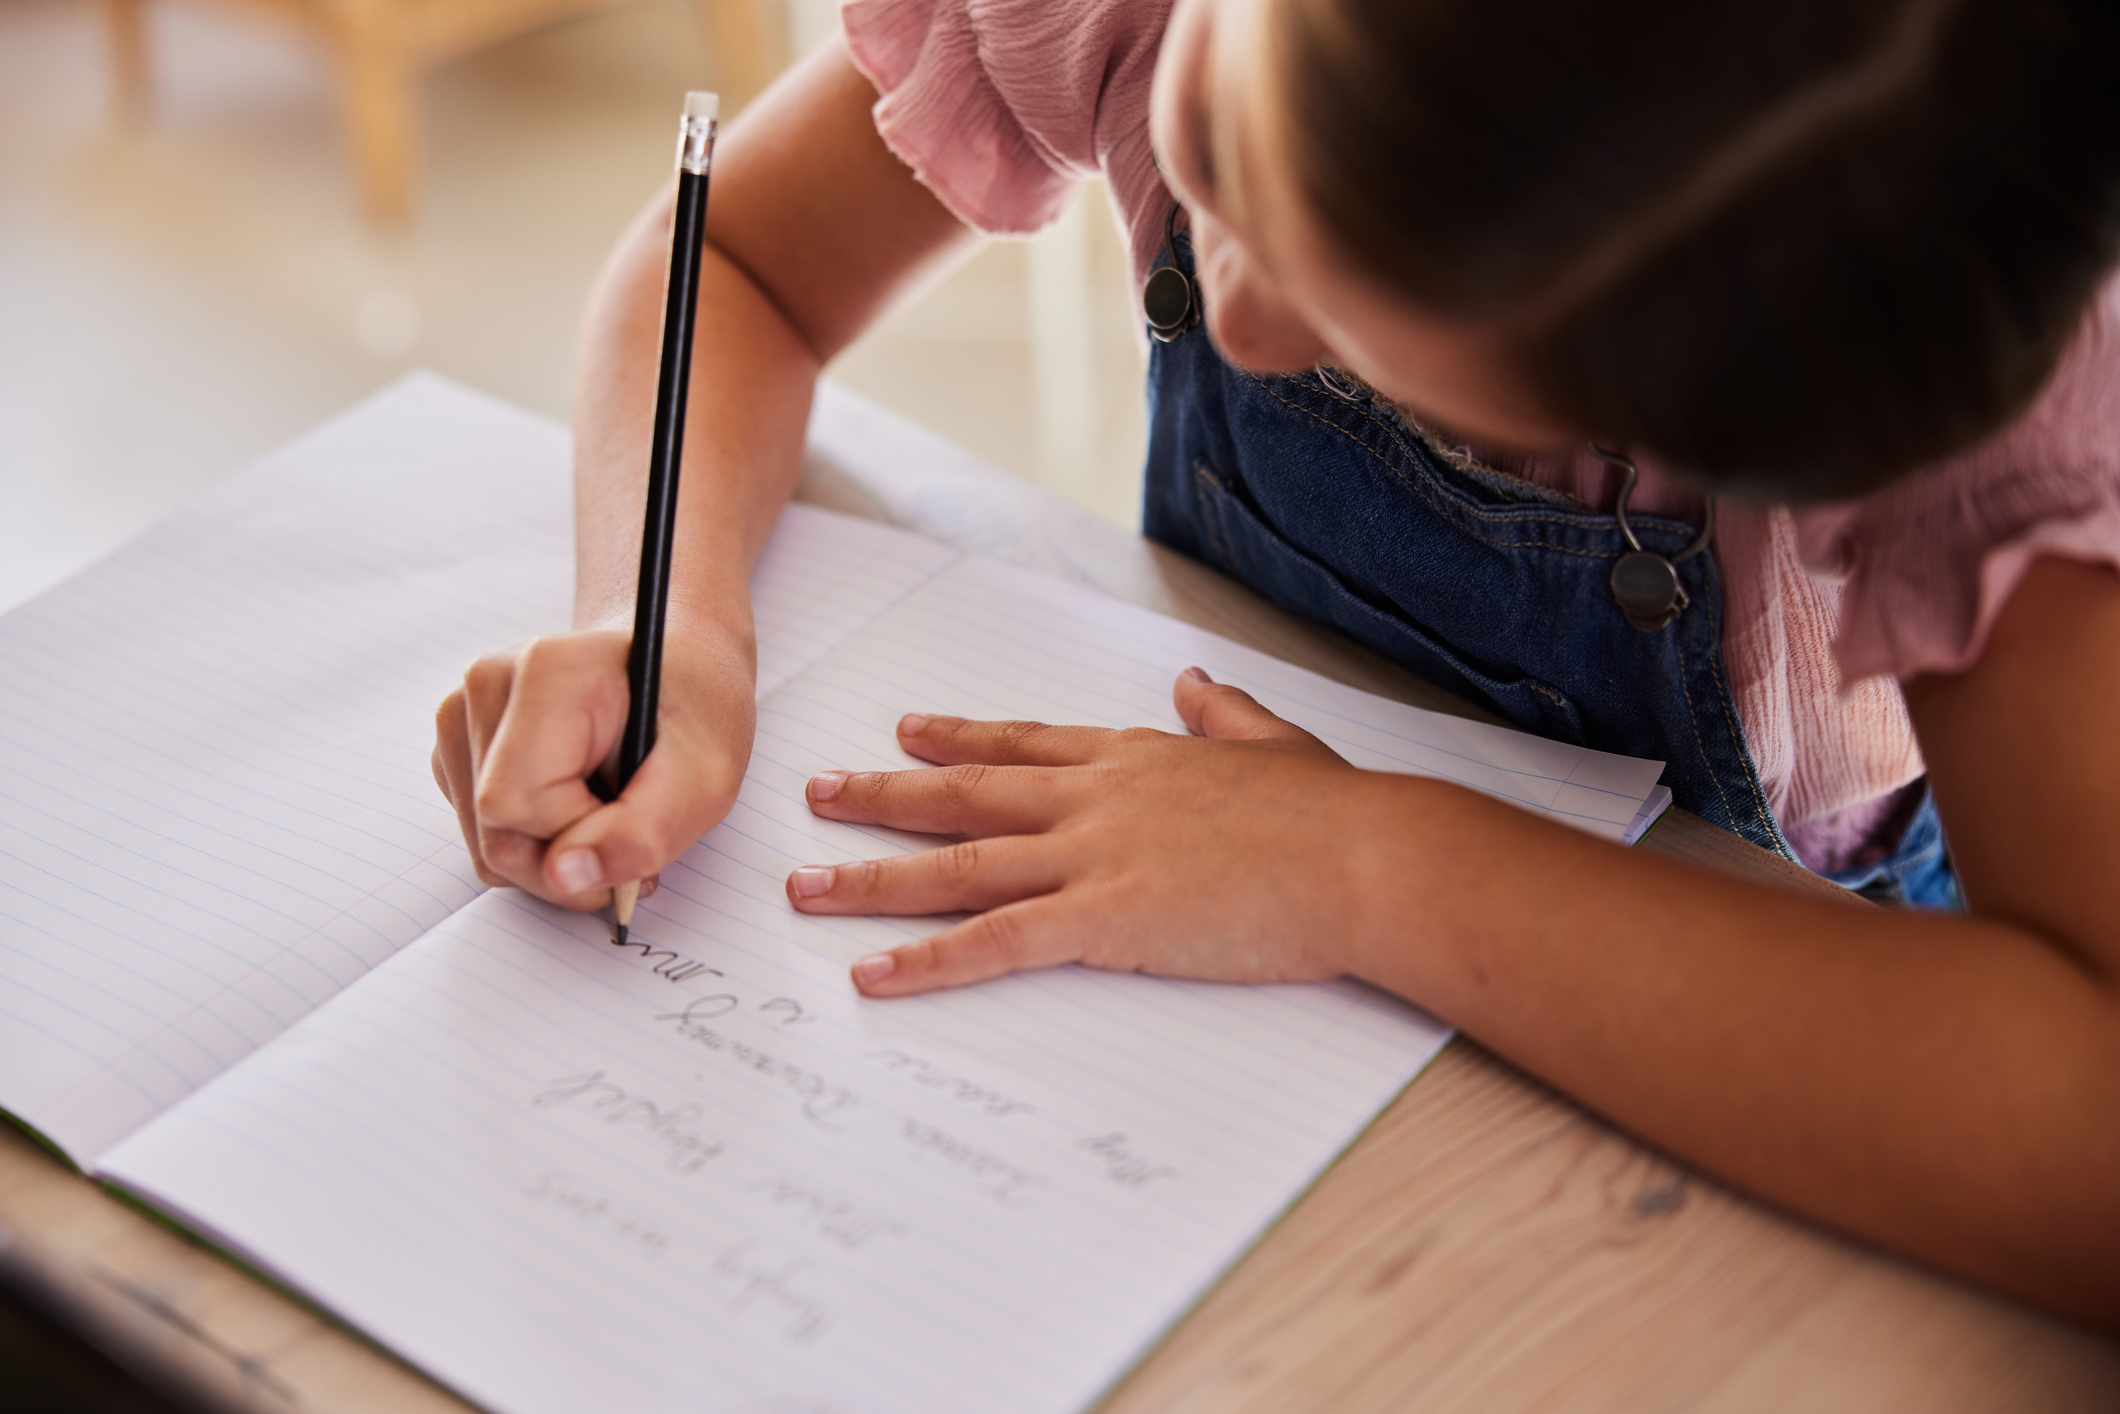 A young child writing in a notebook, focusing intently on their work, dressed casually with short sleeves